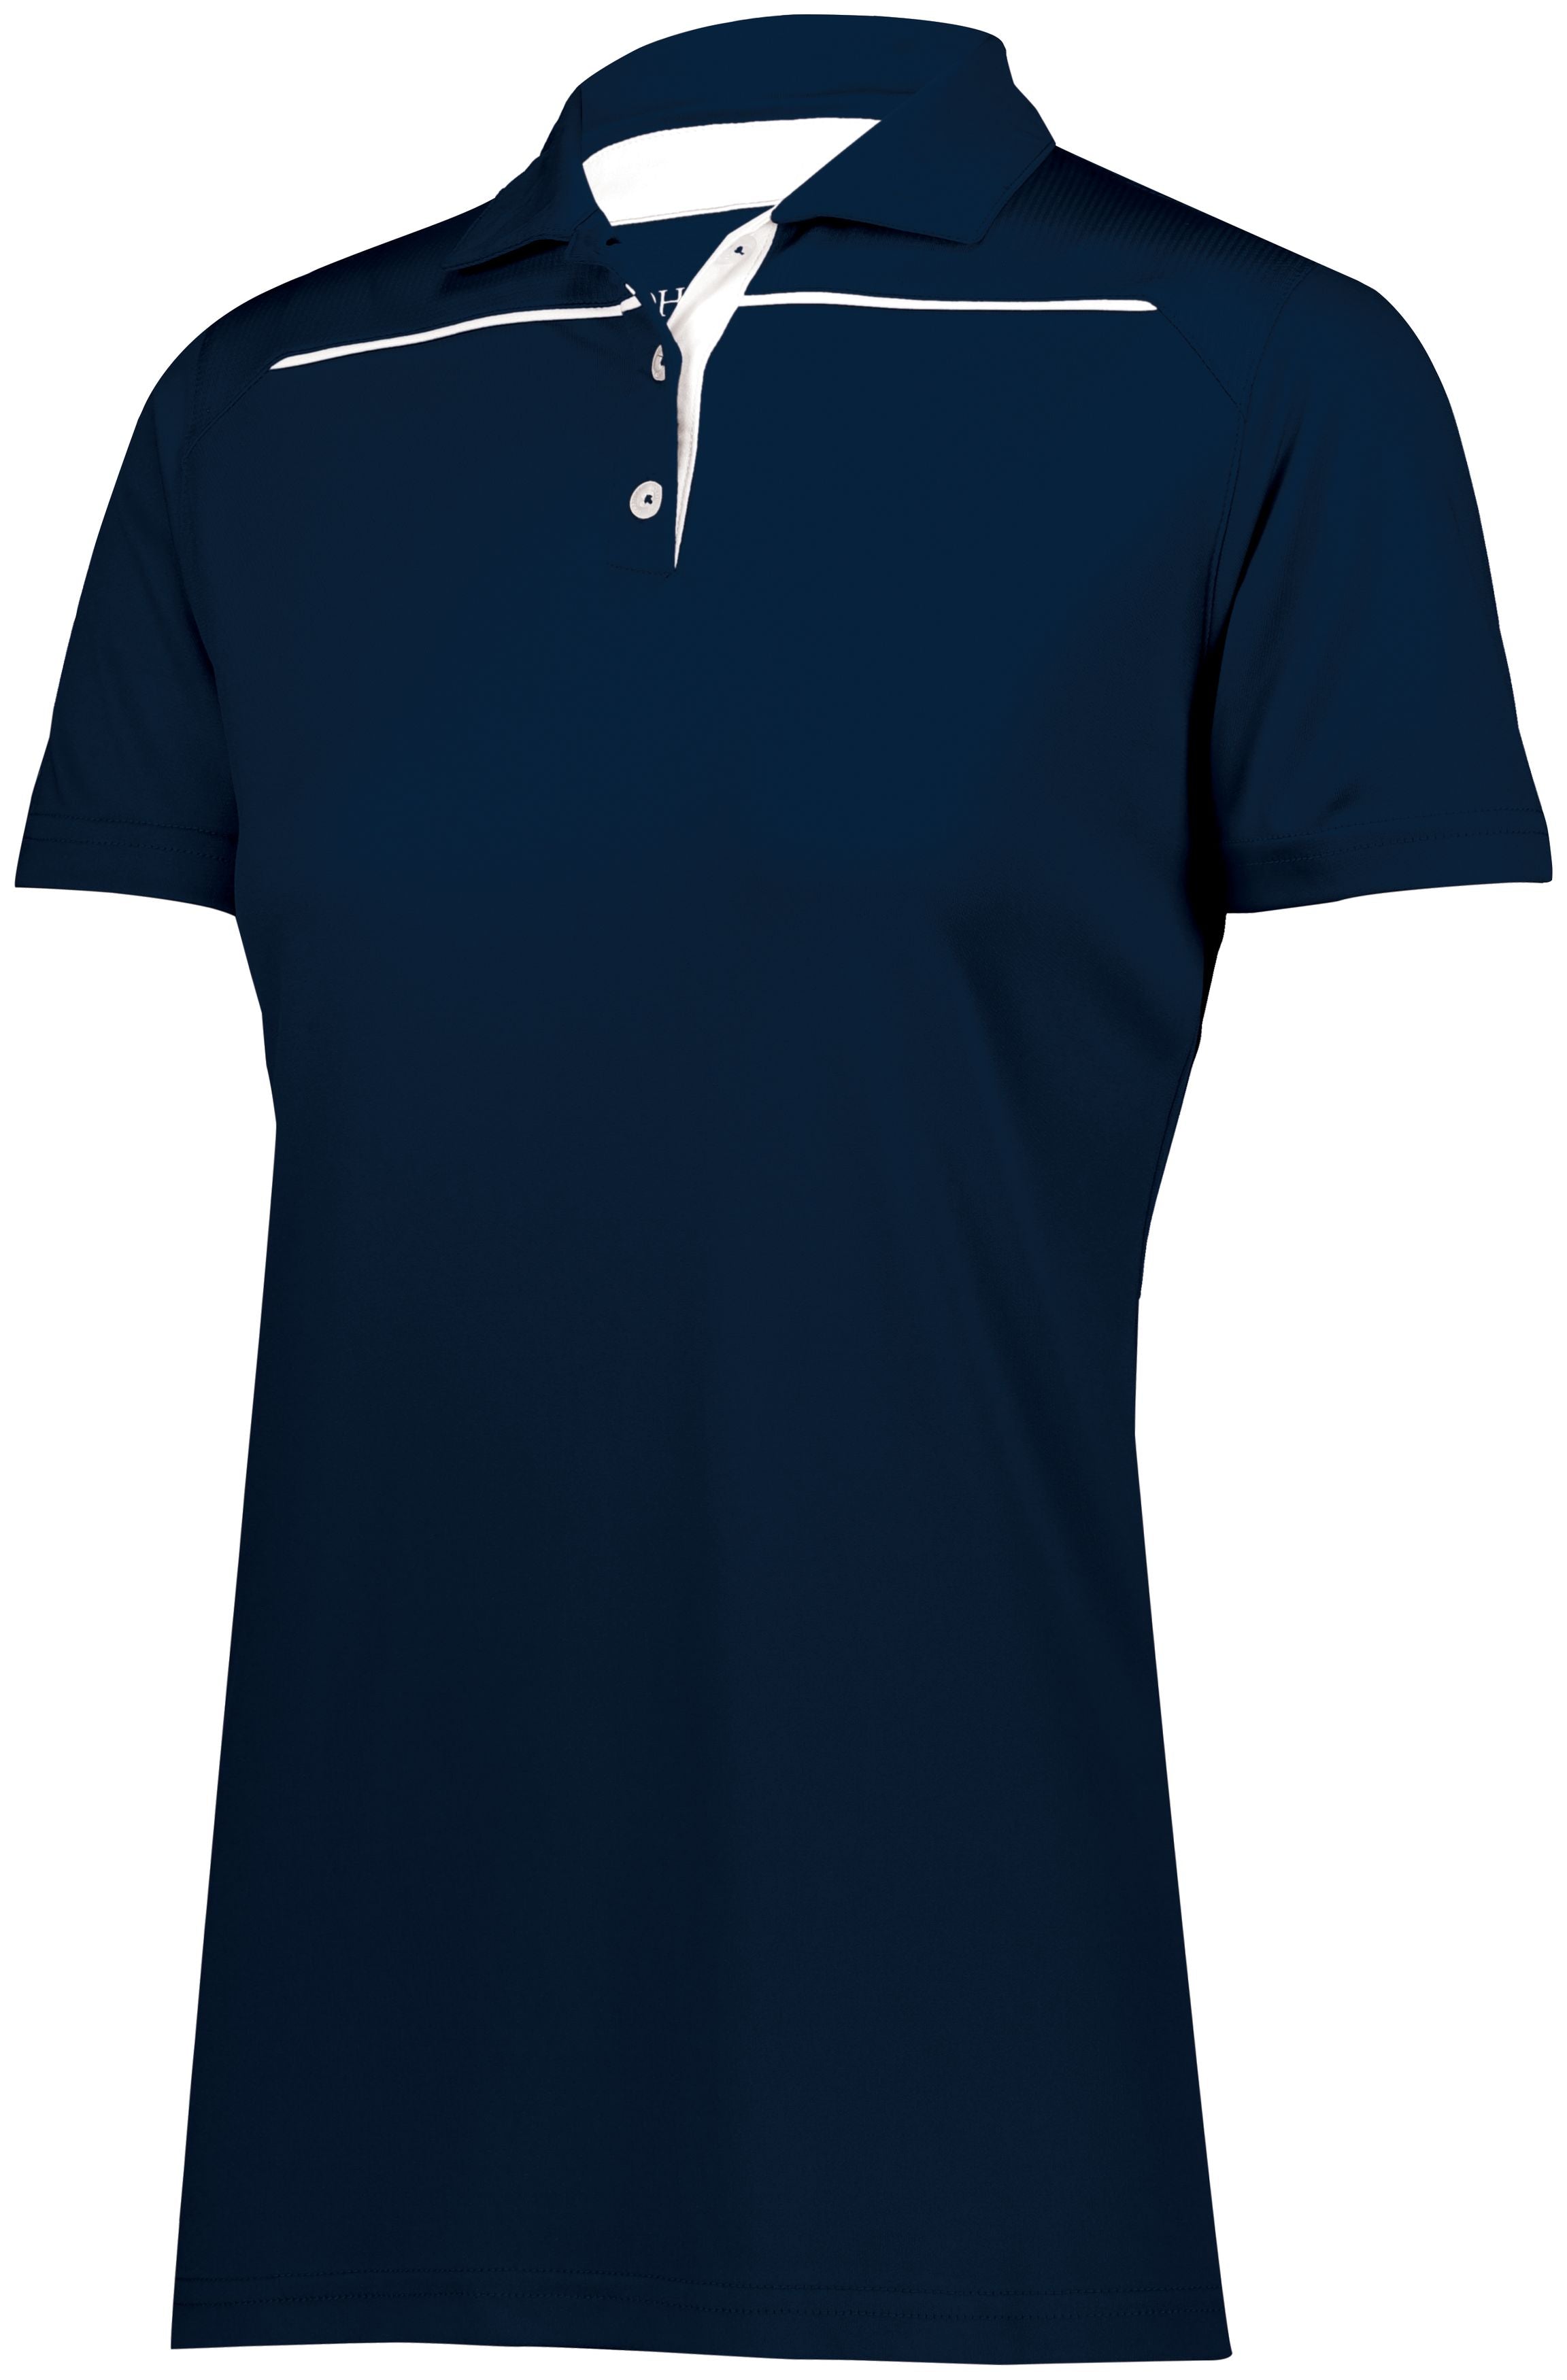 Holloway Ladies Defer Polo in Navy/White  -Part of the Ladies, Ladies-Polo, Polos, Holloway, Shirts product lines at KanaleyCreations.com